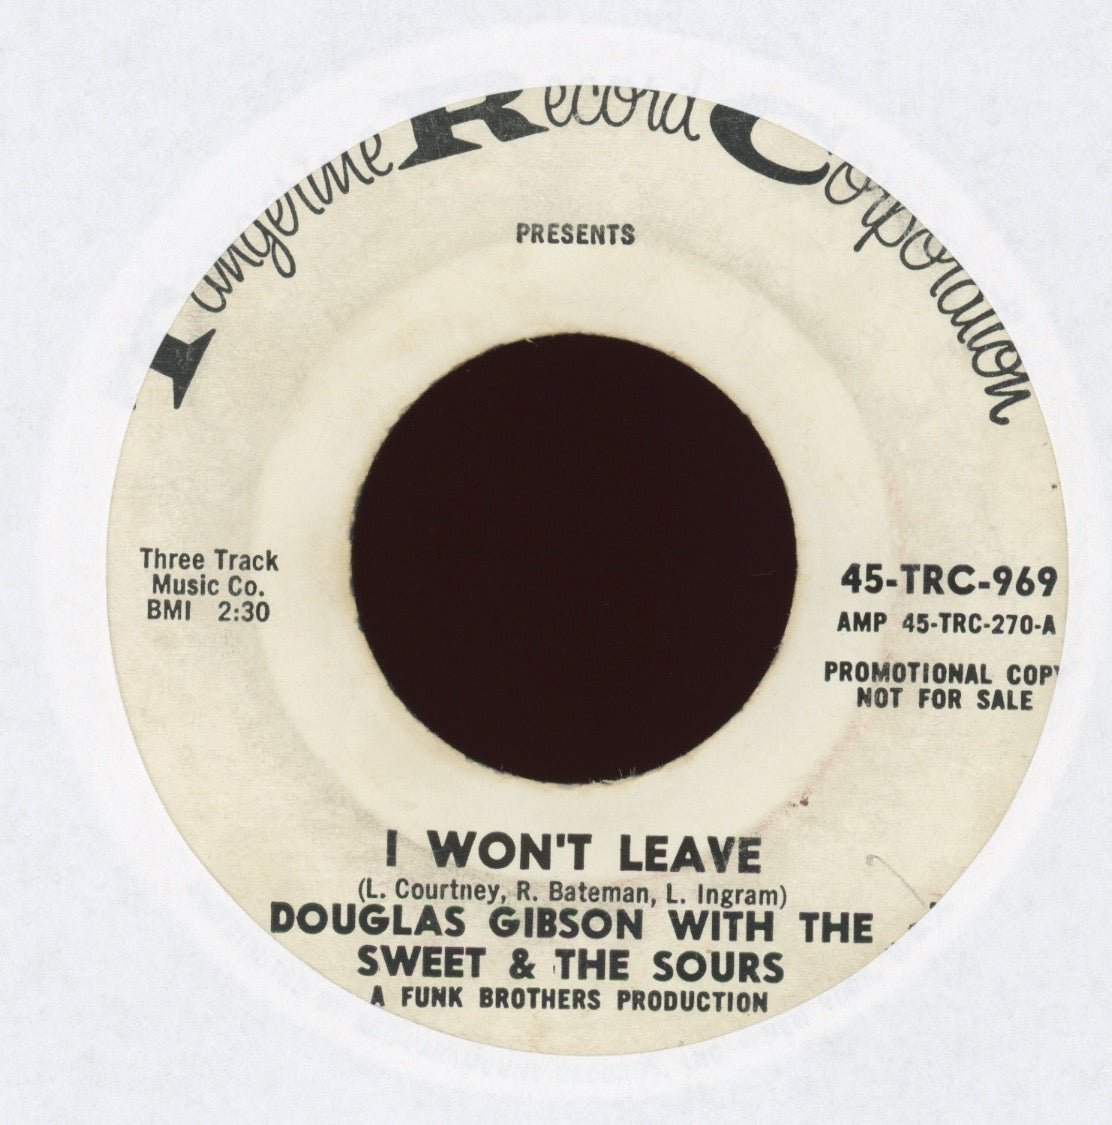 Douglas Gibson With The Sweet & The Sours - Run For Your Life on Tangerine Promo